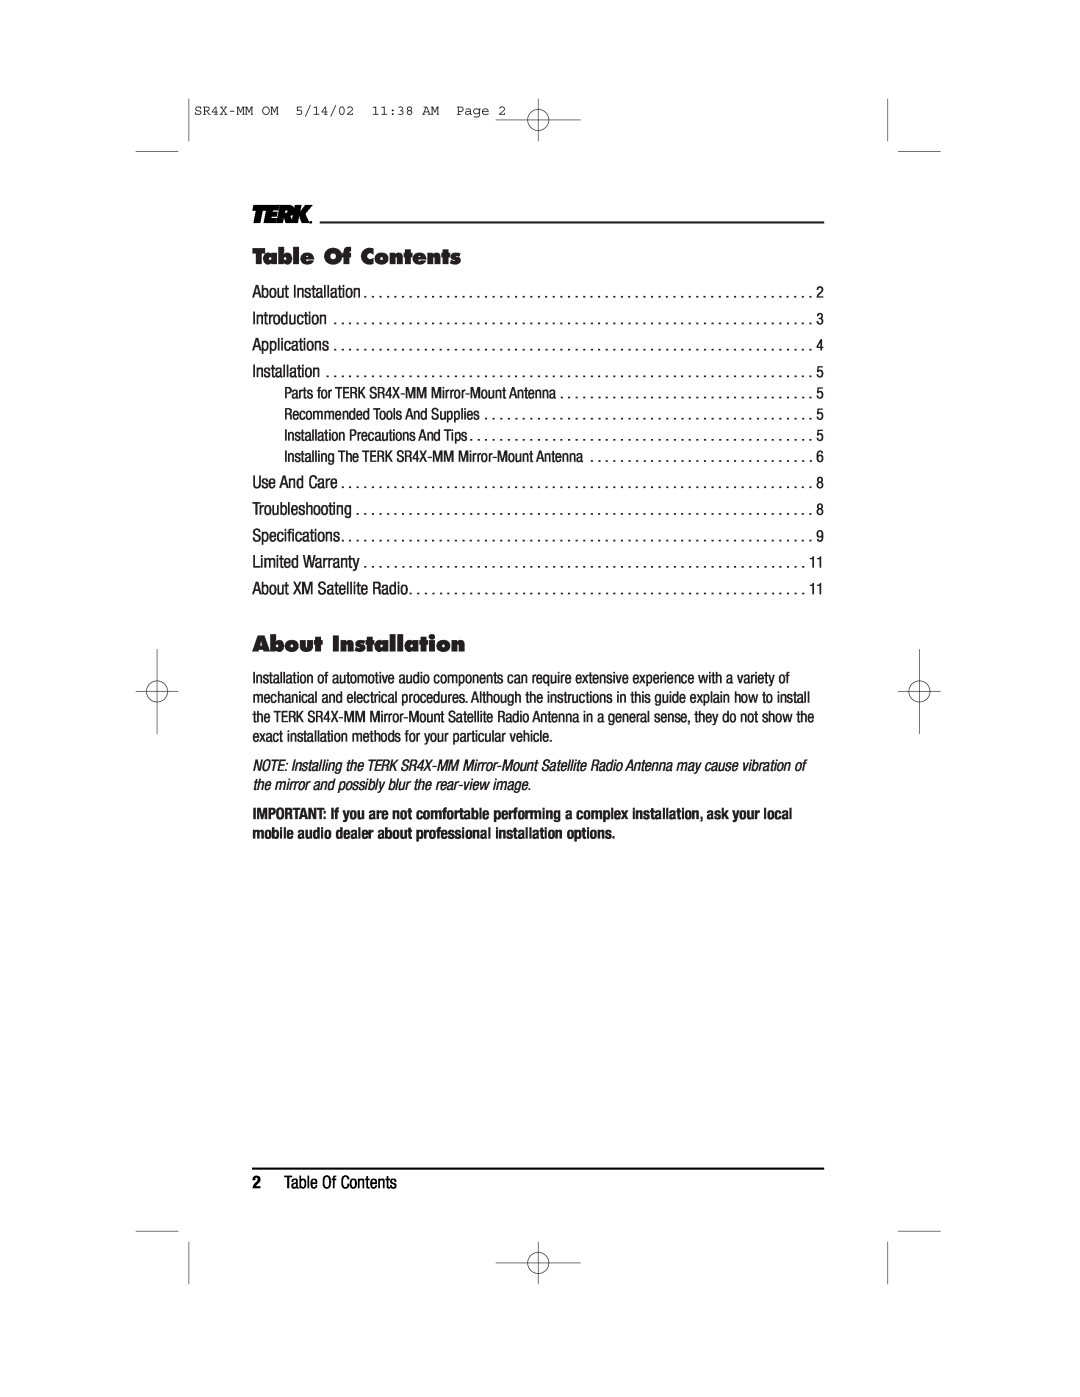 TERK Technologies MM owner manual About Installation, 2Table Of Contents 